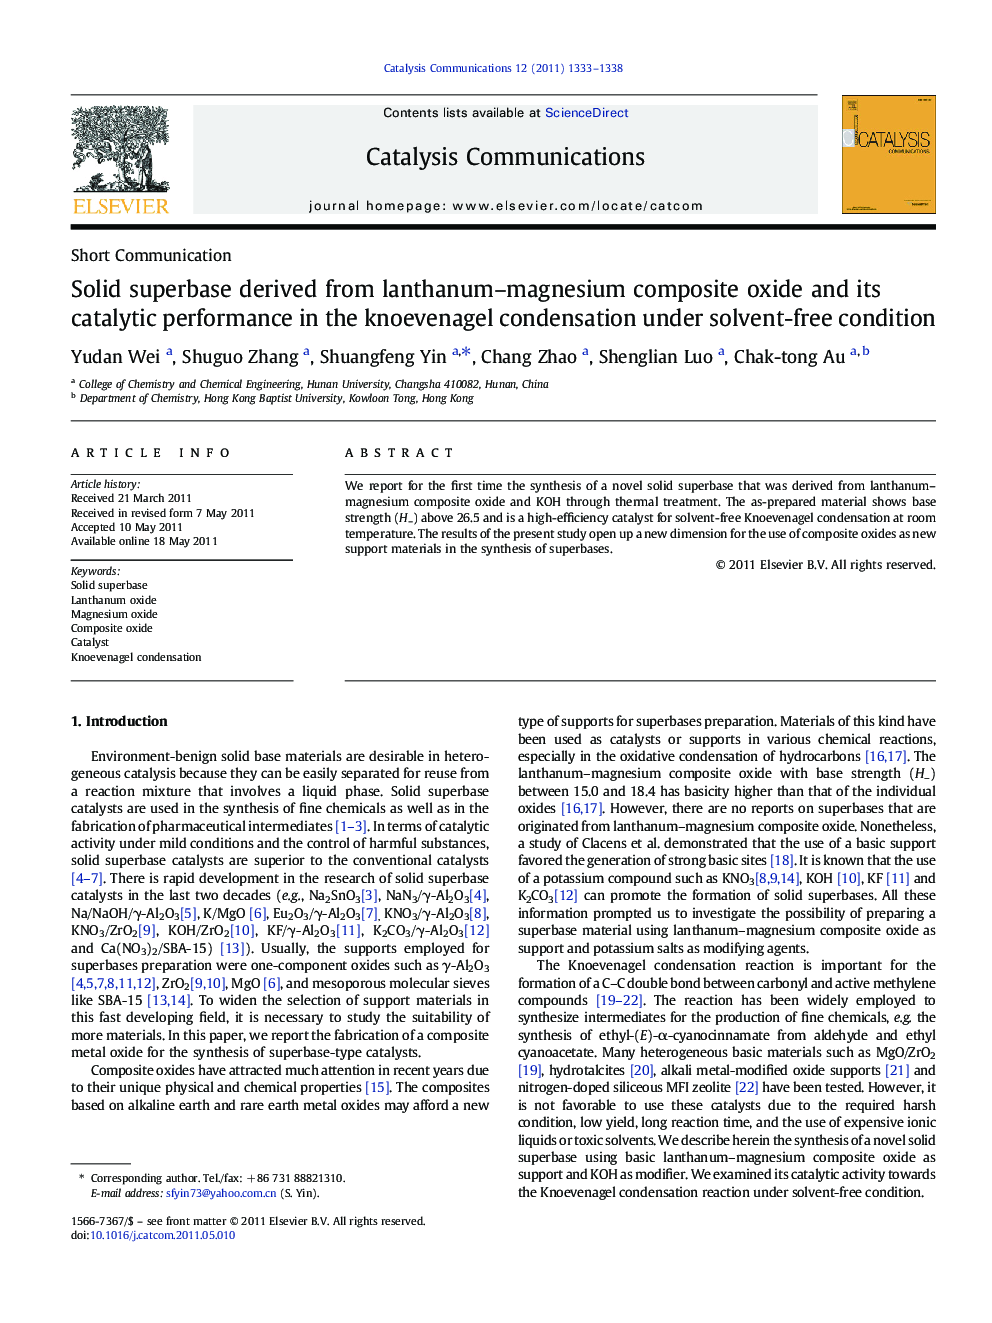 Solid superbase derived from lanthanum–magnesium composite oxide and its catalytic performance in the knoevenagel condensation under solvent-free condition